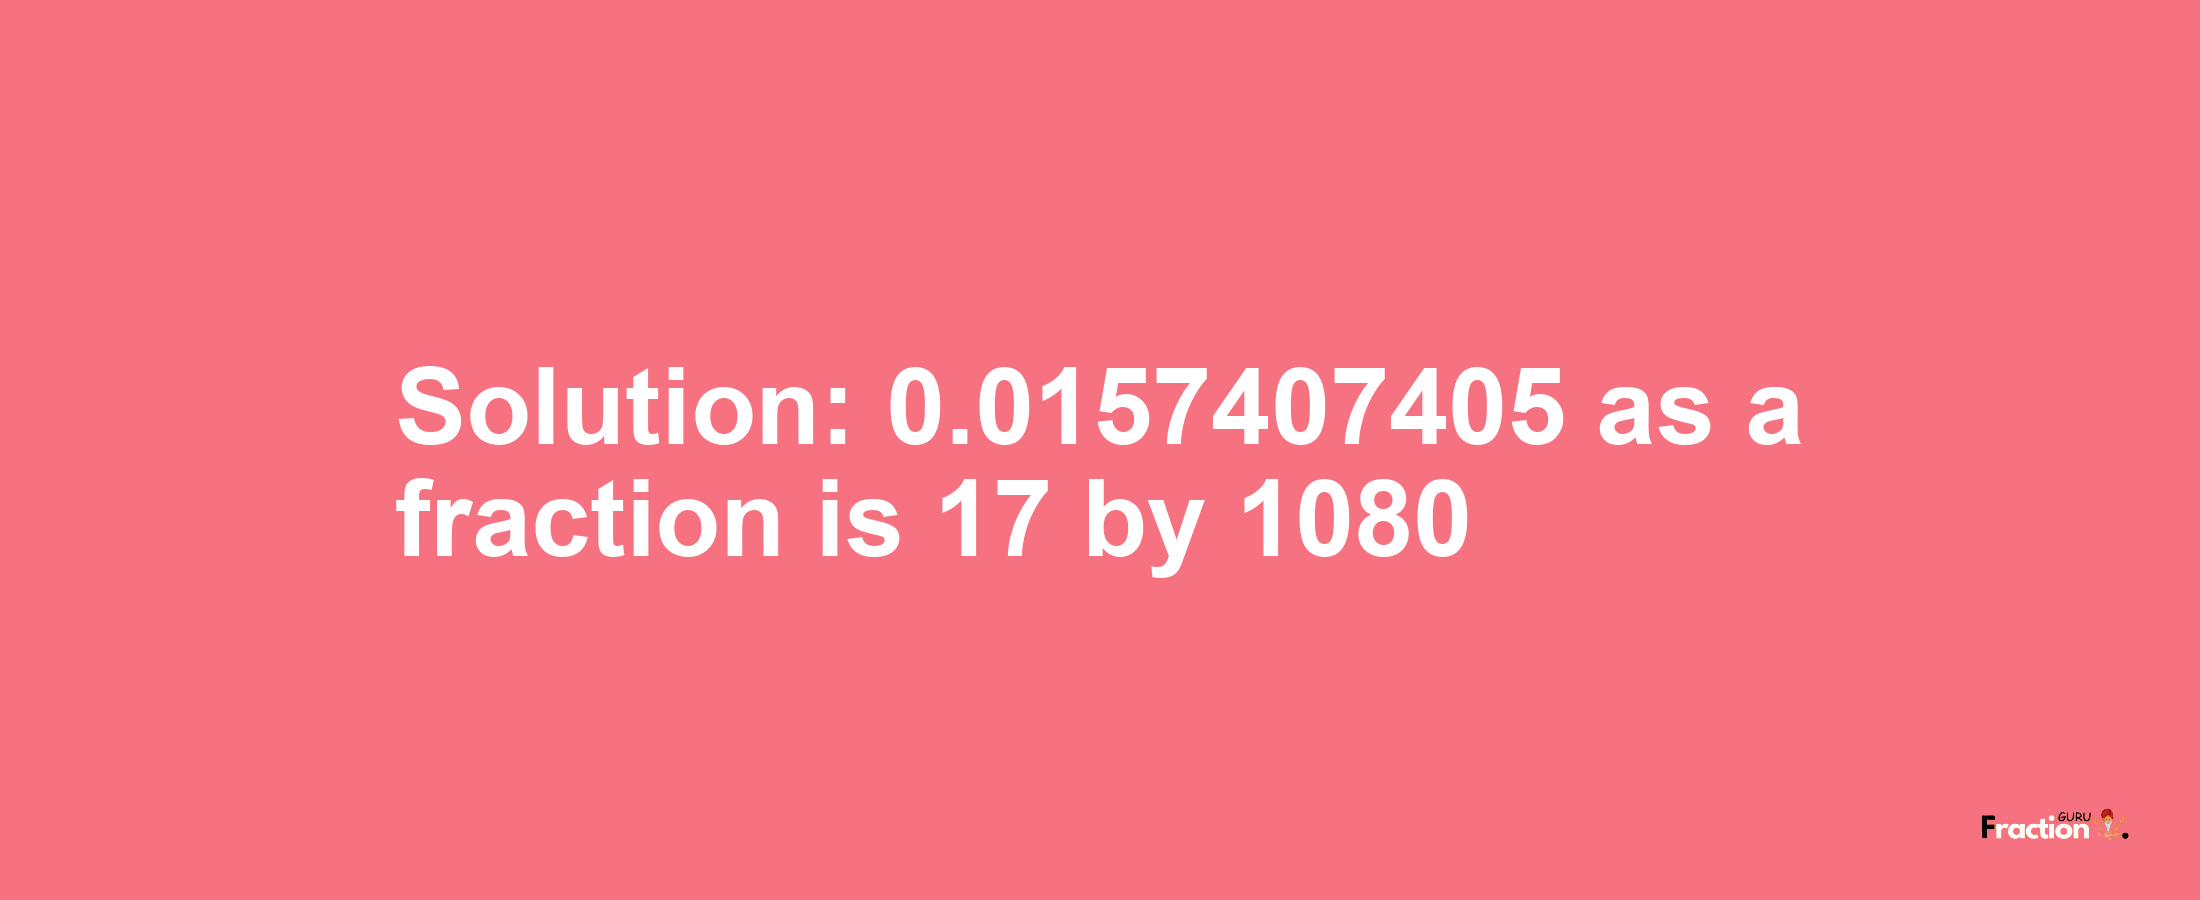 Solution:0.0157407405 as a fraction is 17/1080